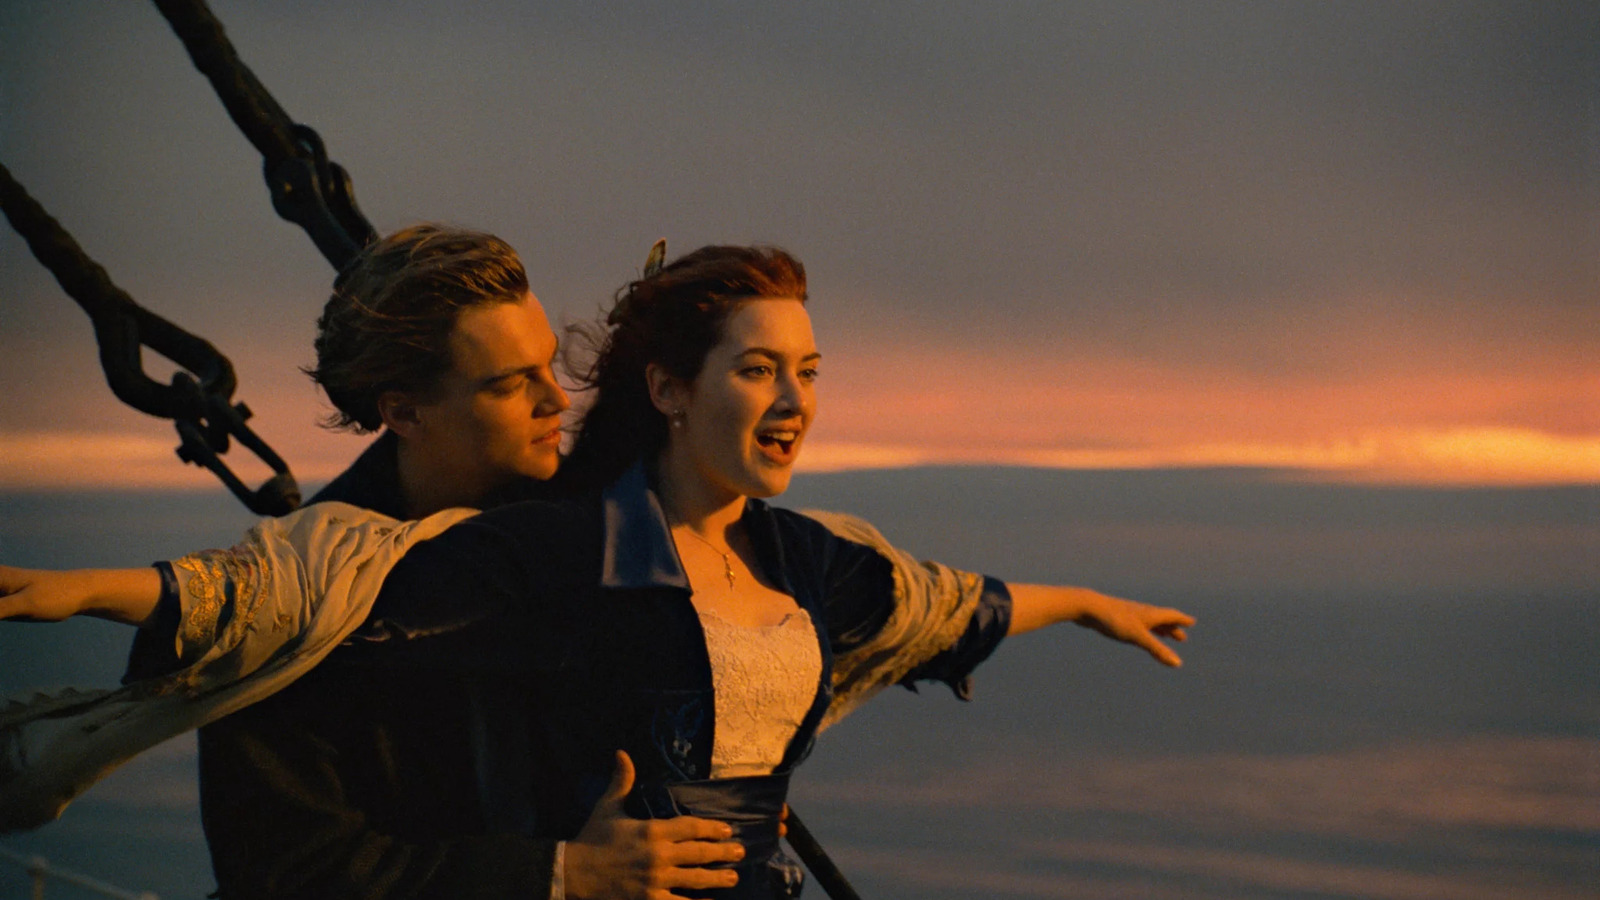 James Cameron Doesn't Know If Titanic Would Be PG-13 Today